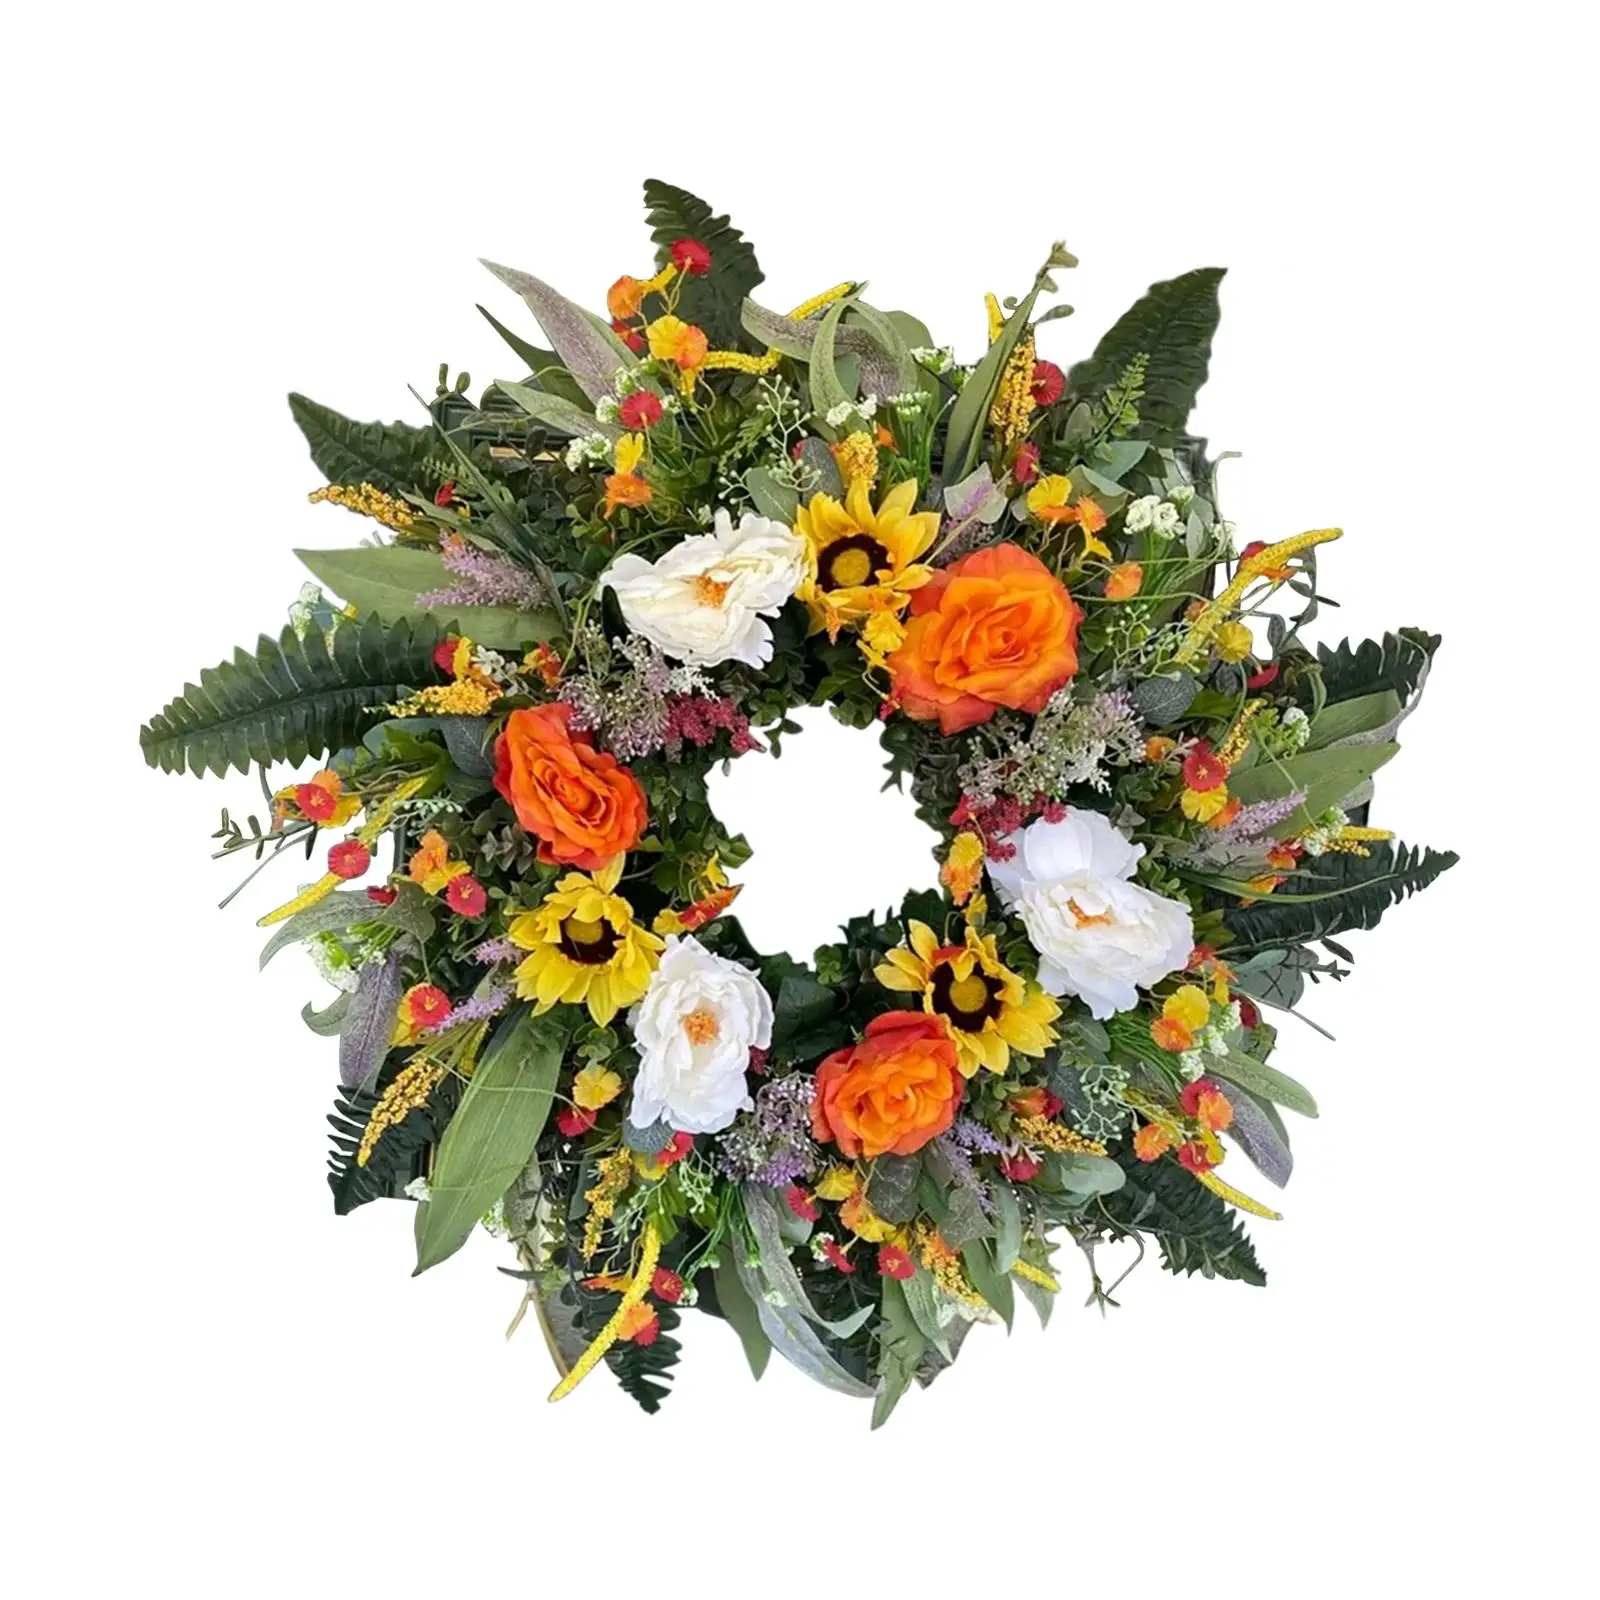 Artificial Flower Wreath Spring and Summer Wreath Green Leaf Wreath Wall Hanging 15.7inch Floral Wreaths for Garden Home Decor